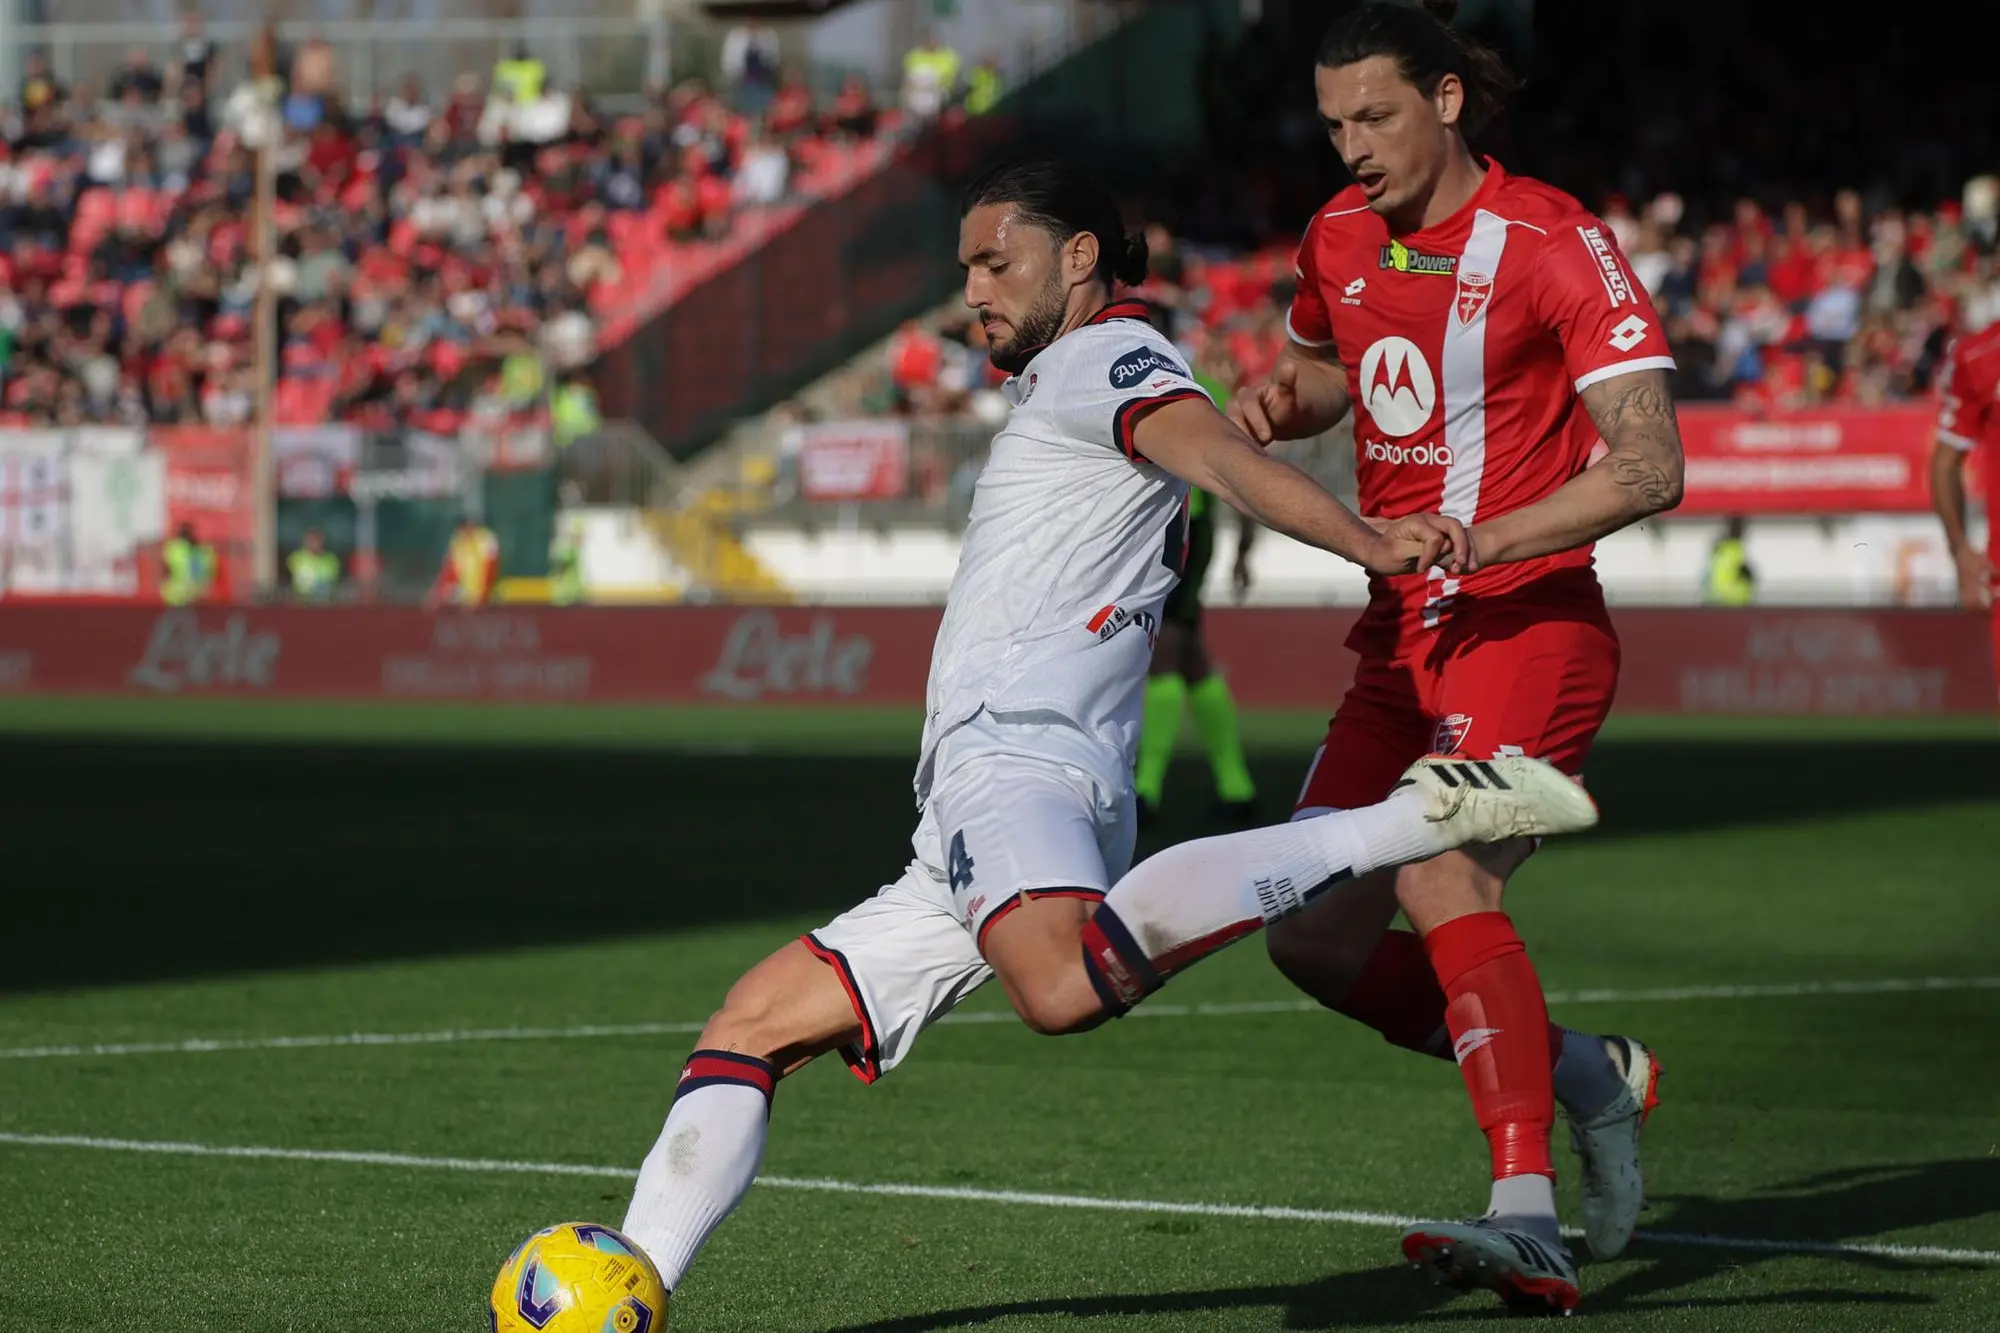 Cagliari's defender Alberto Dossena in action against AC Monza's forward Milan Djuric during the Italian Serie A soccer match between AC Monza and Cagliari at U-Power Stadium in Monza, Italy, 16 March 2024. ANSA / ROBERTO BREGANI